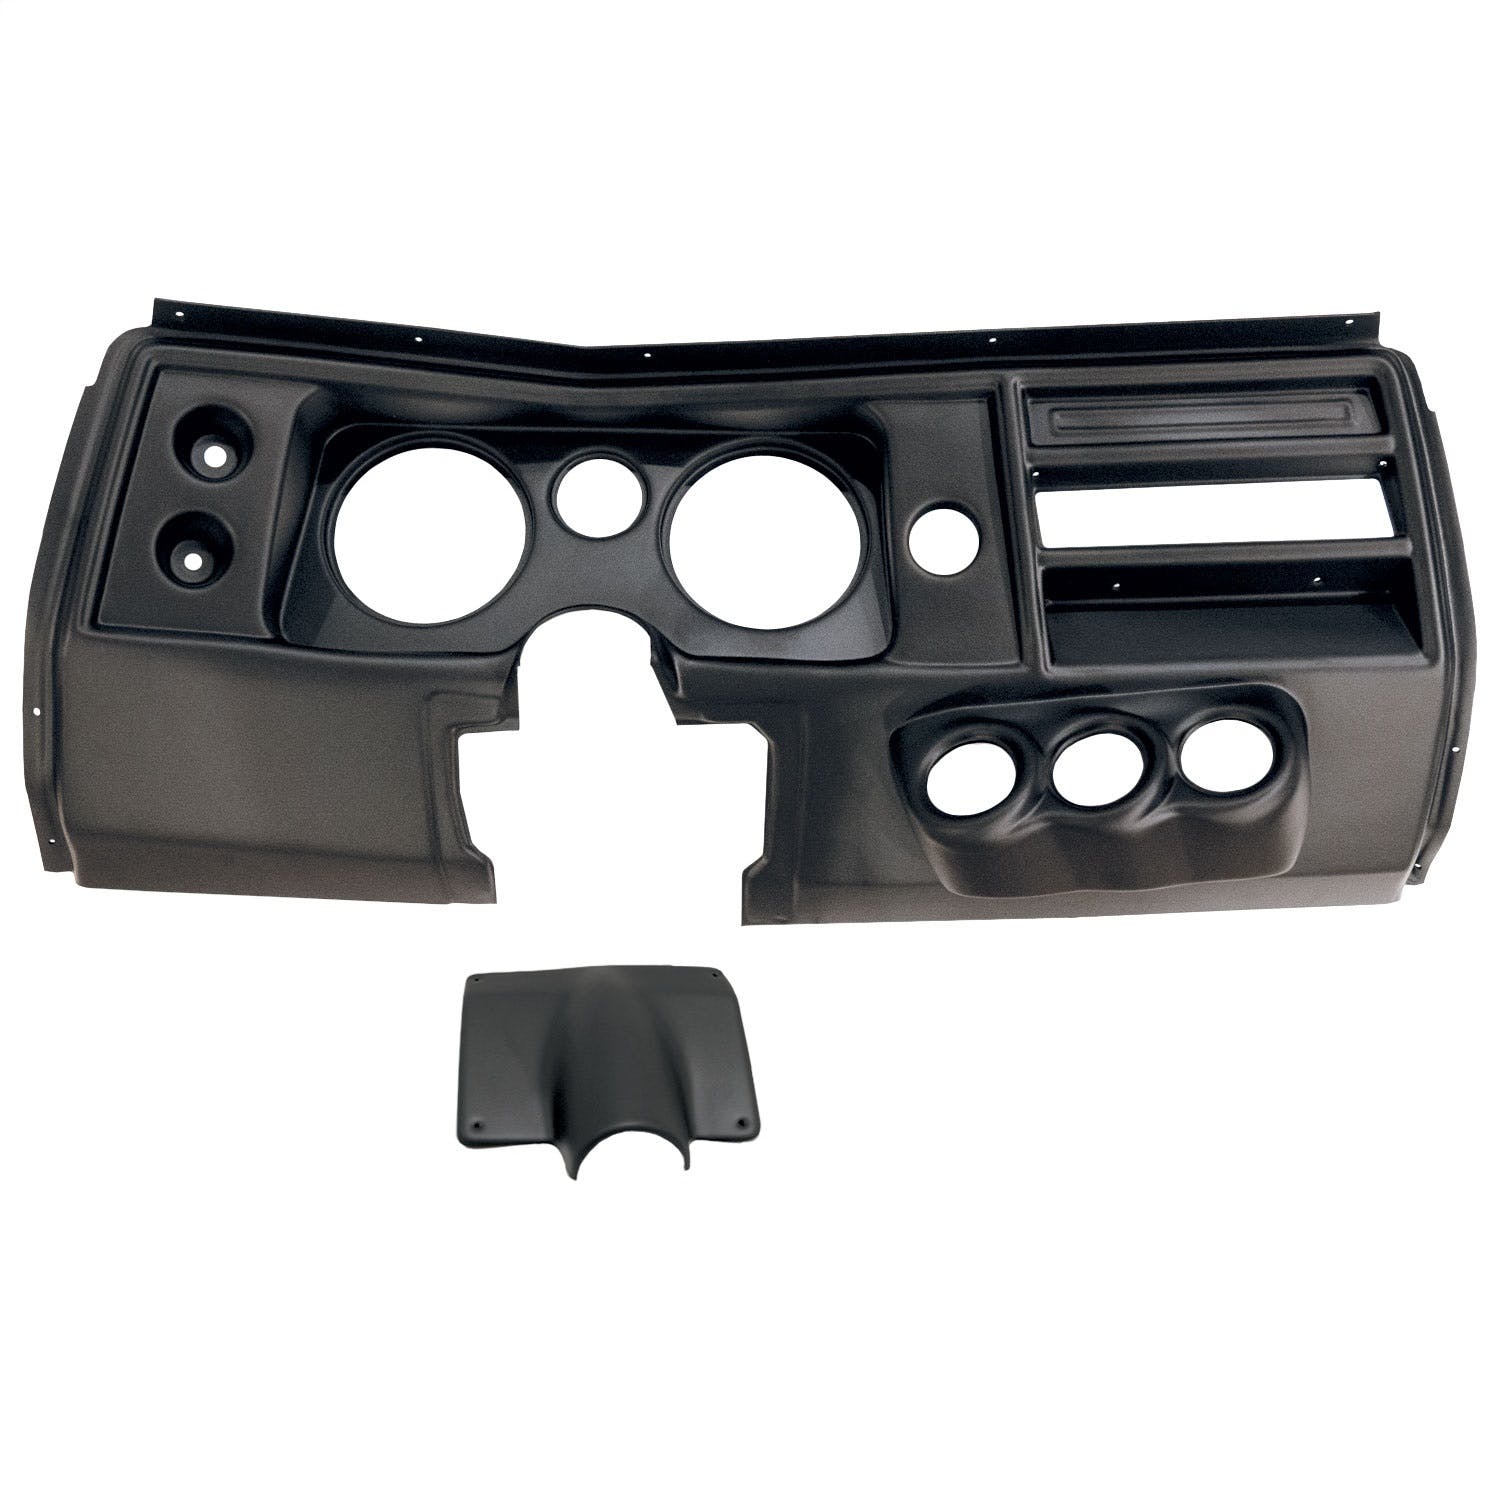 AutoMeter Products 2903-14 6 Gauge Direct-Fit Dash Kit, Chevy Chevelle No Vent 68, Ultra-Lite II